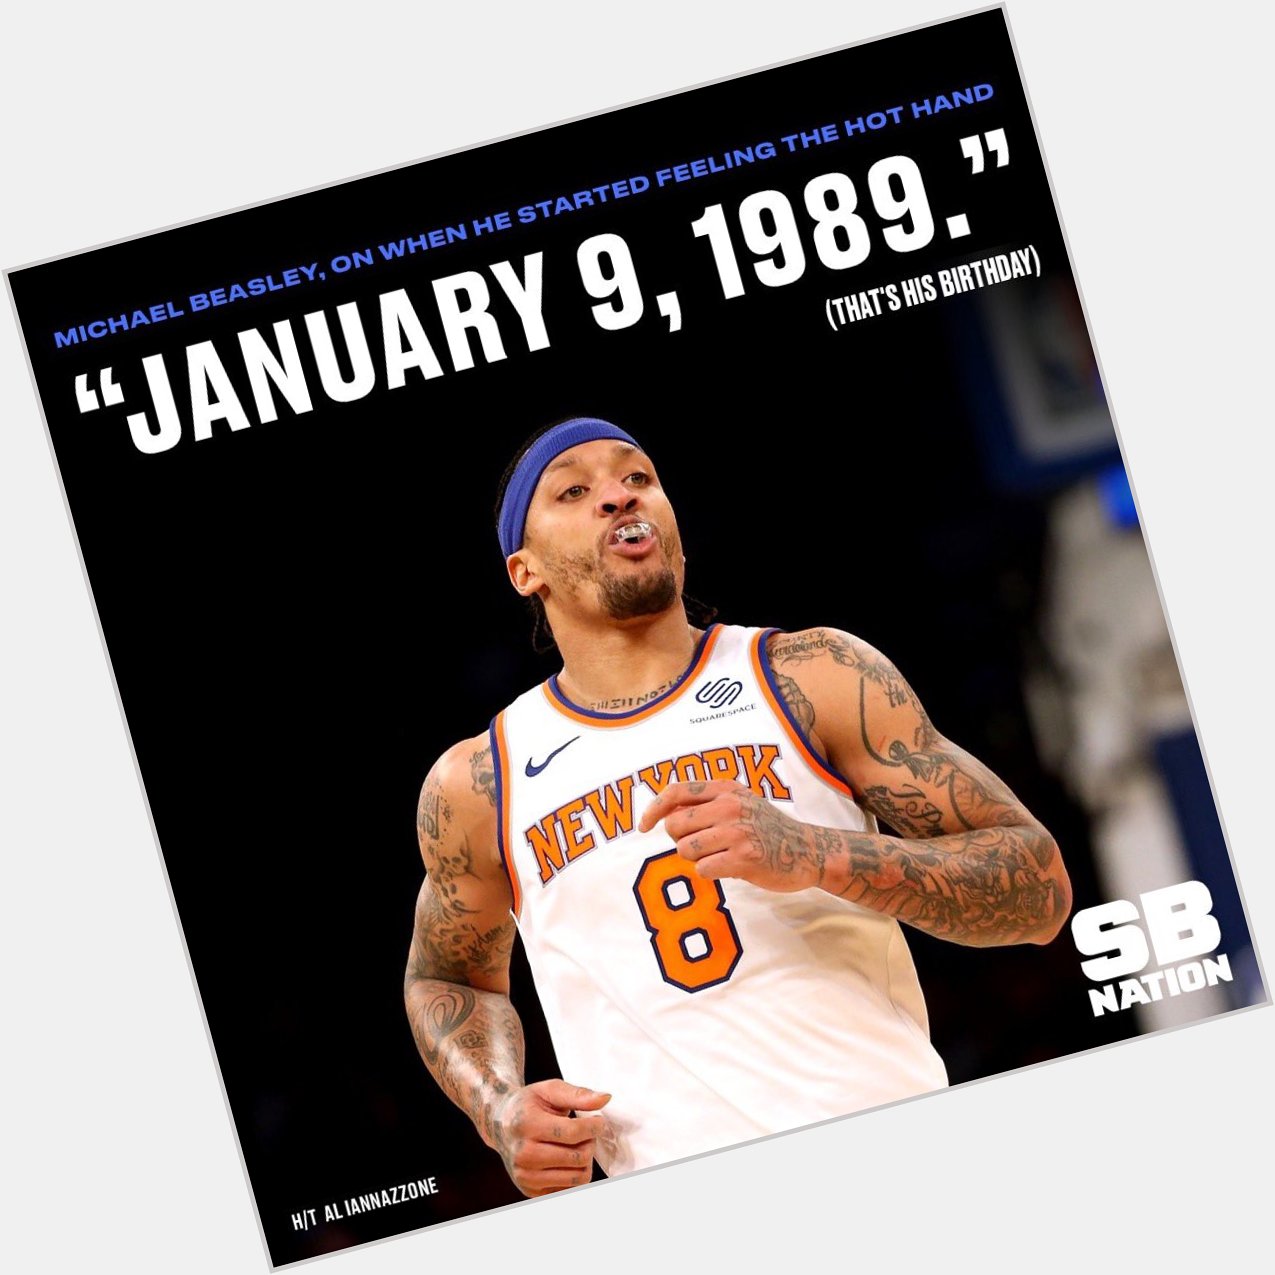 Happy Birthday to Michael Beasley who has been since day one. 